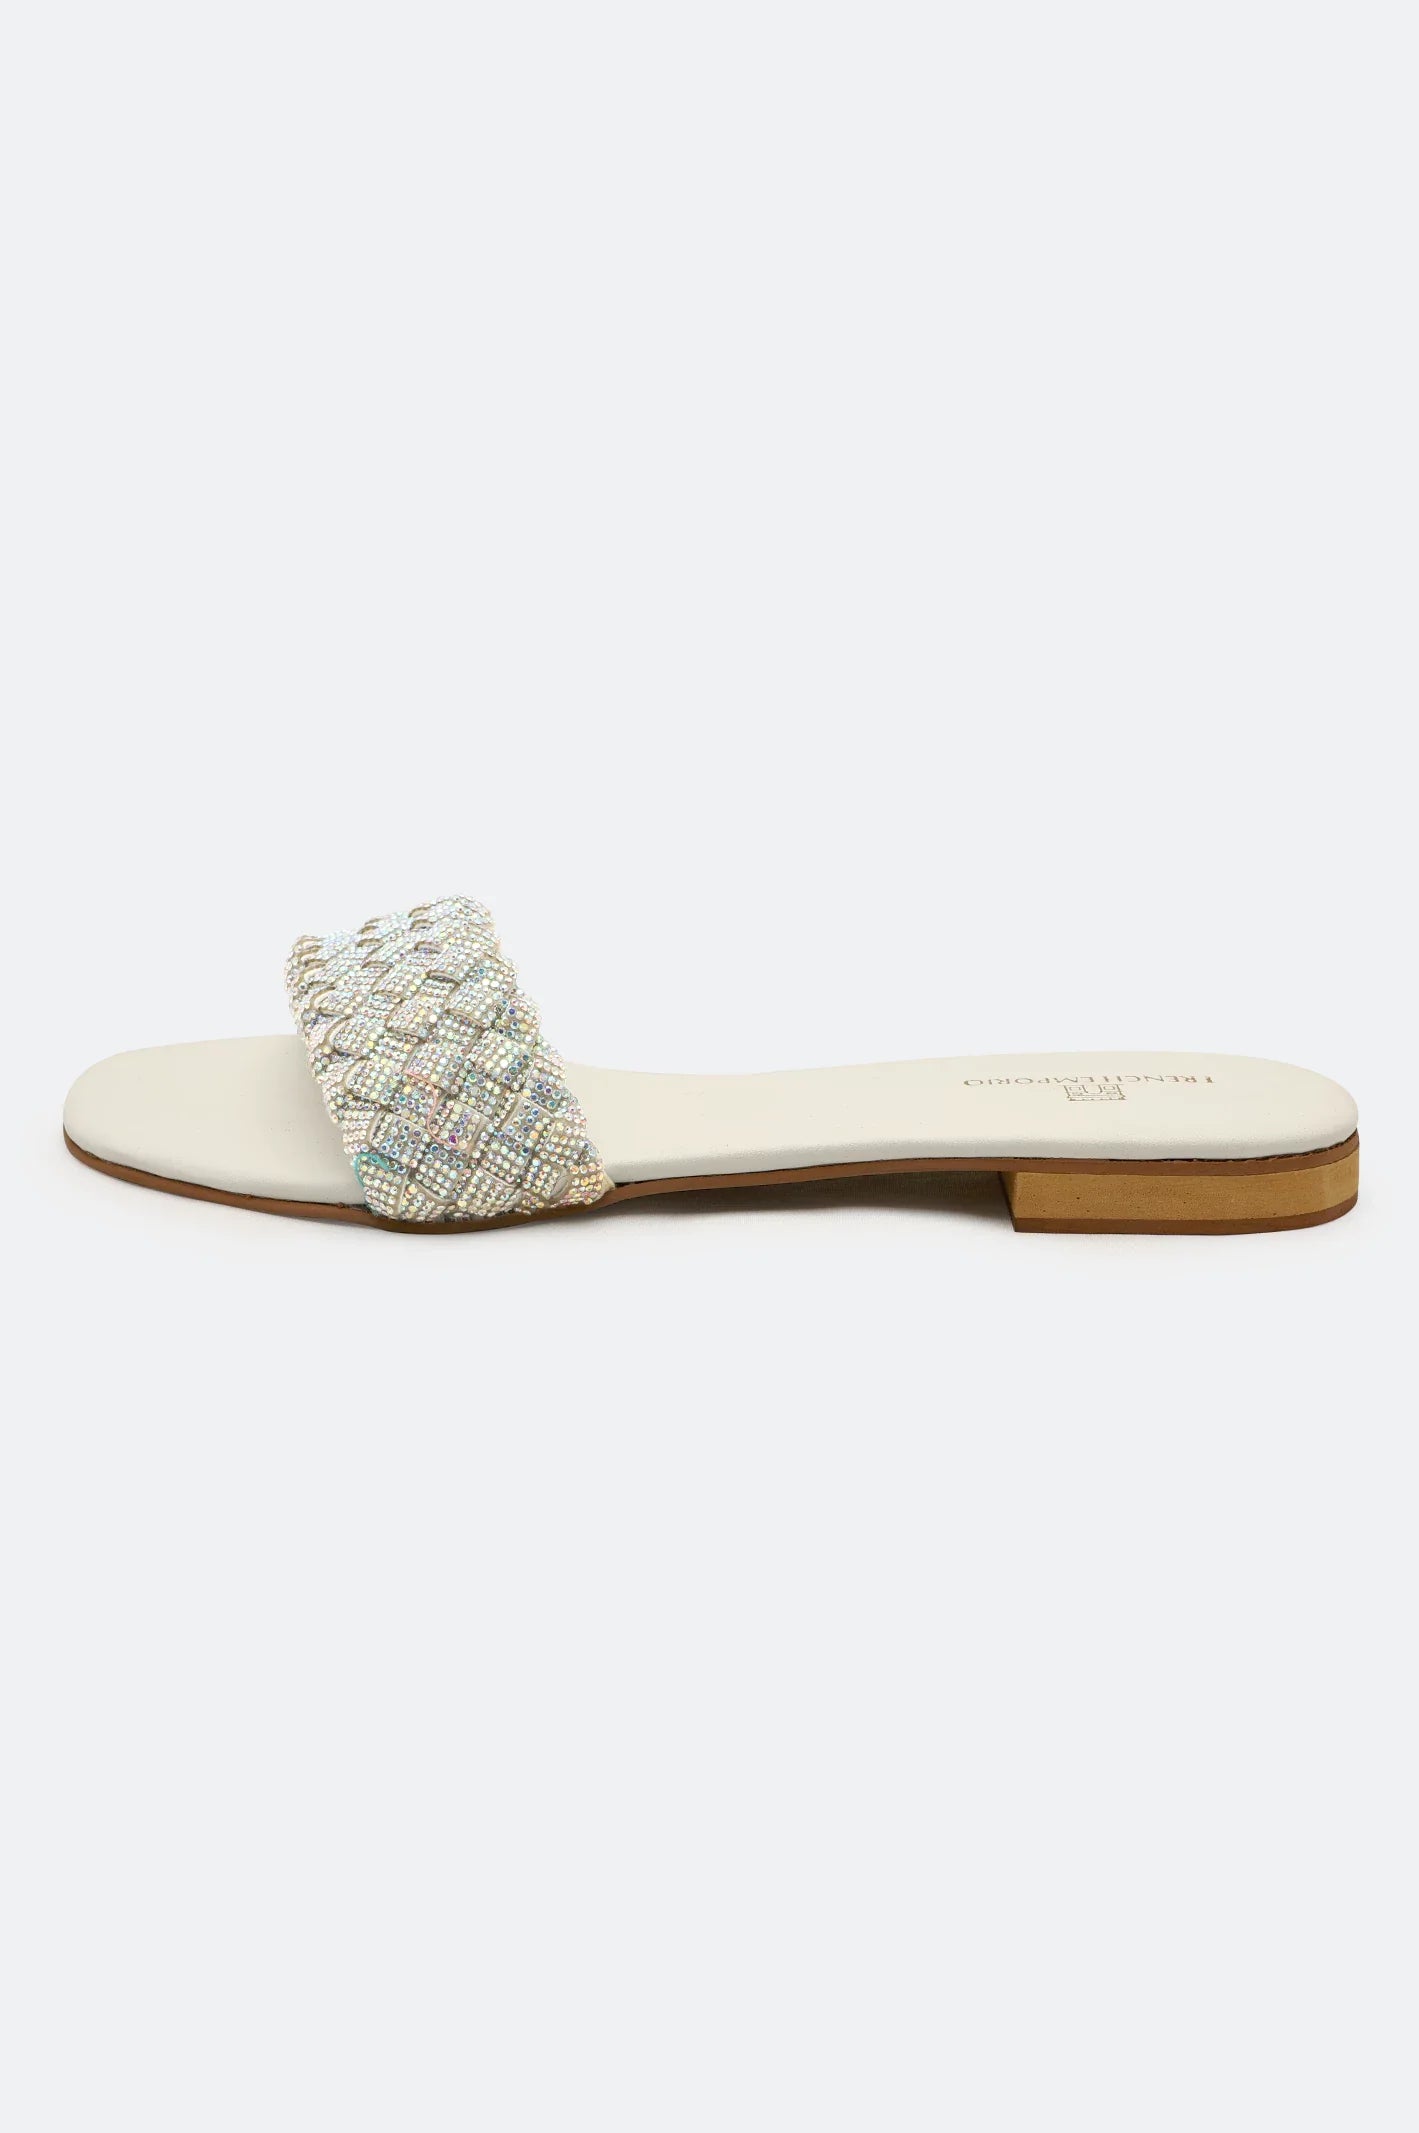 White Ladies Casual Slippers From French Emporio By Diners